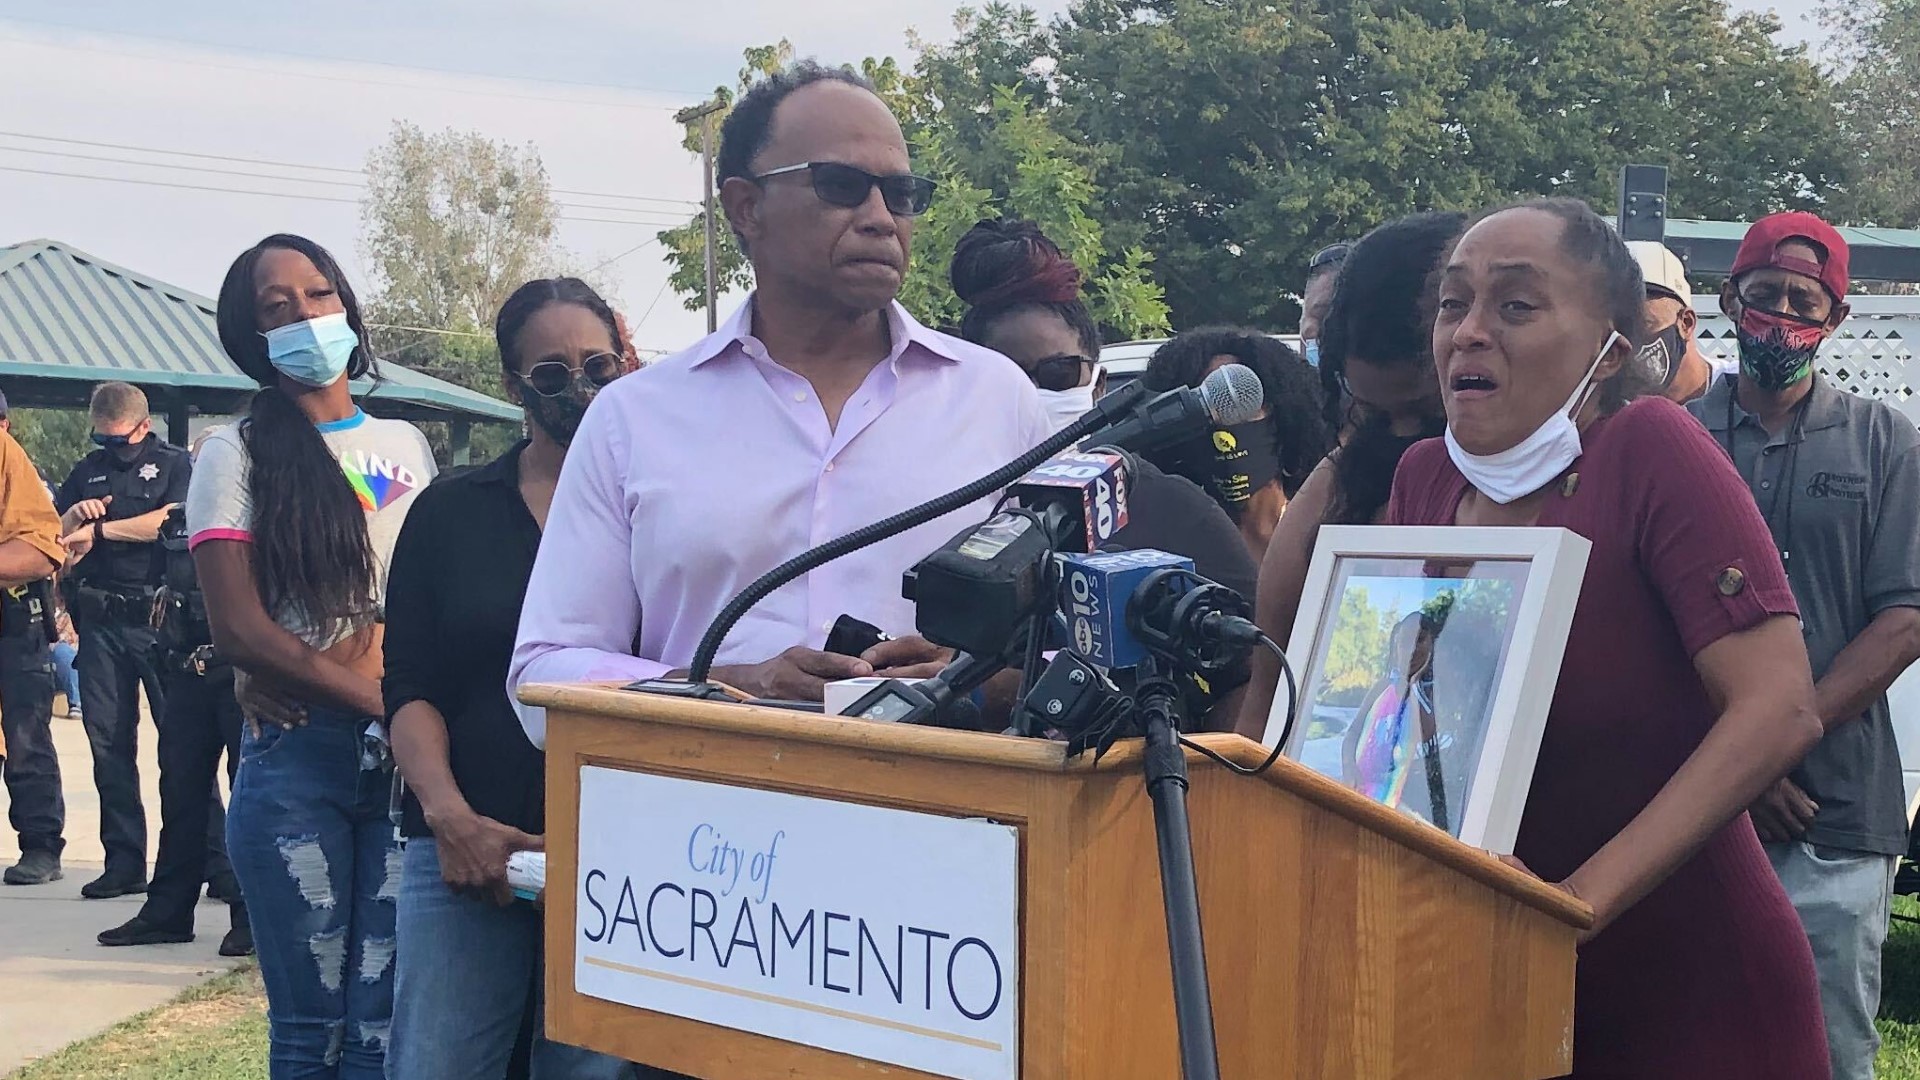 After 9-year-old Makaylah Brent was killed during a weekend of violence, officials are calling for new investments in an ailing Del Paso Heights community.